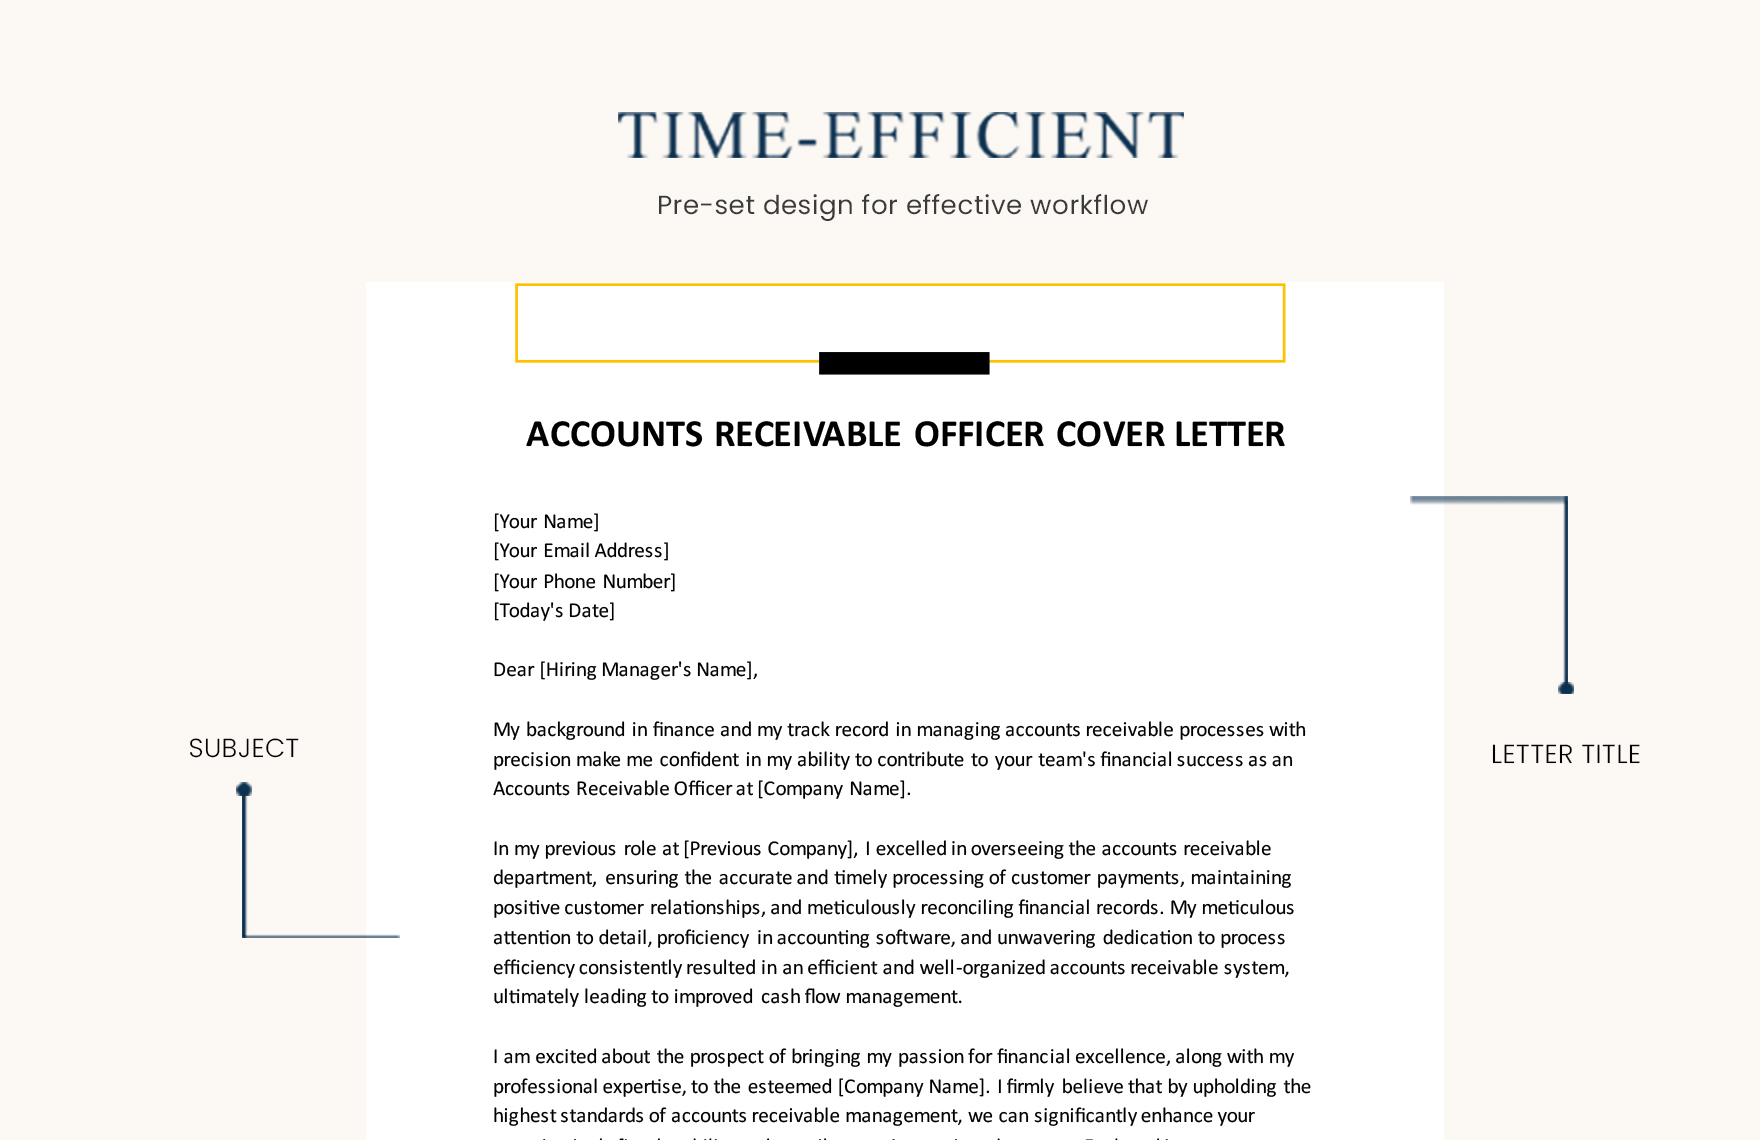 Accounts Receivable Officer Cover Letter